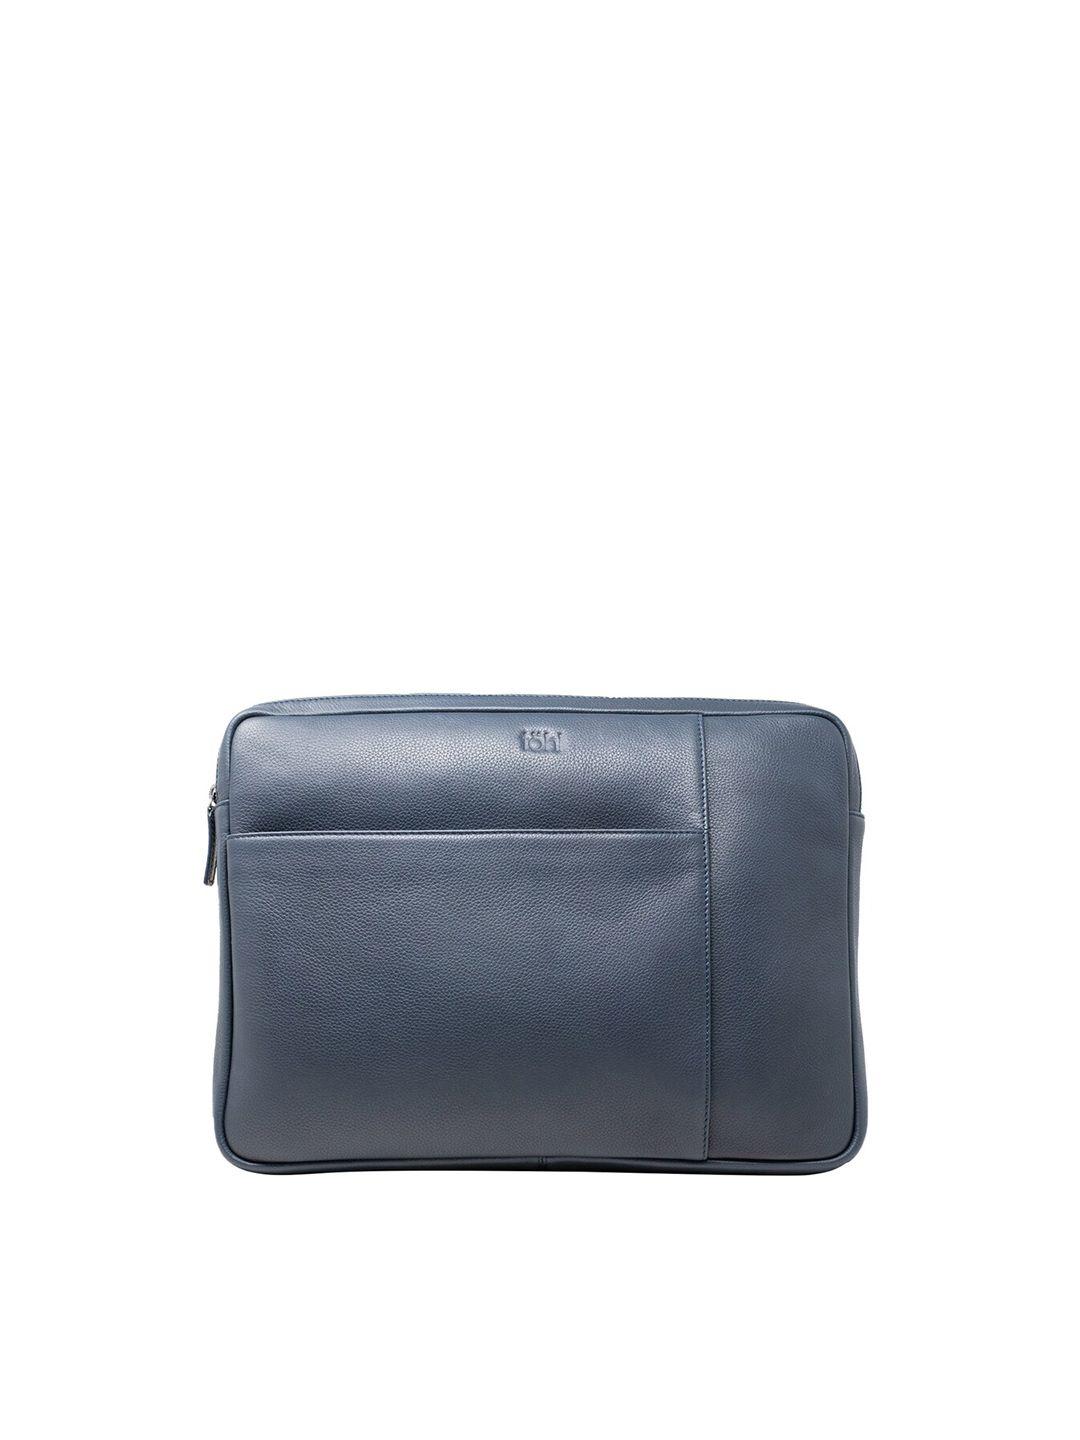 tohl unisex navy blue leather 13 inch laptop sleeve